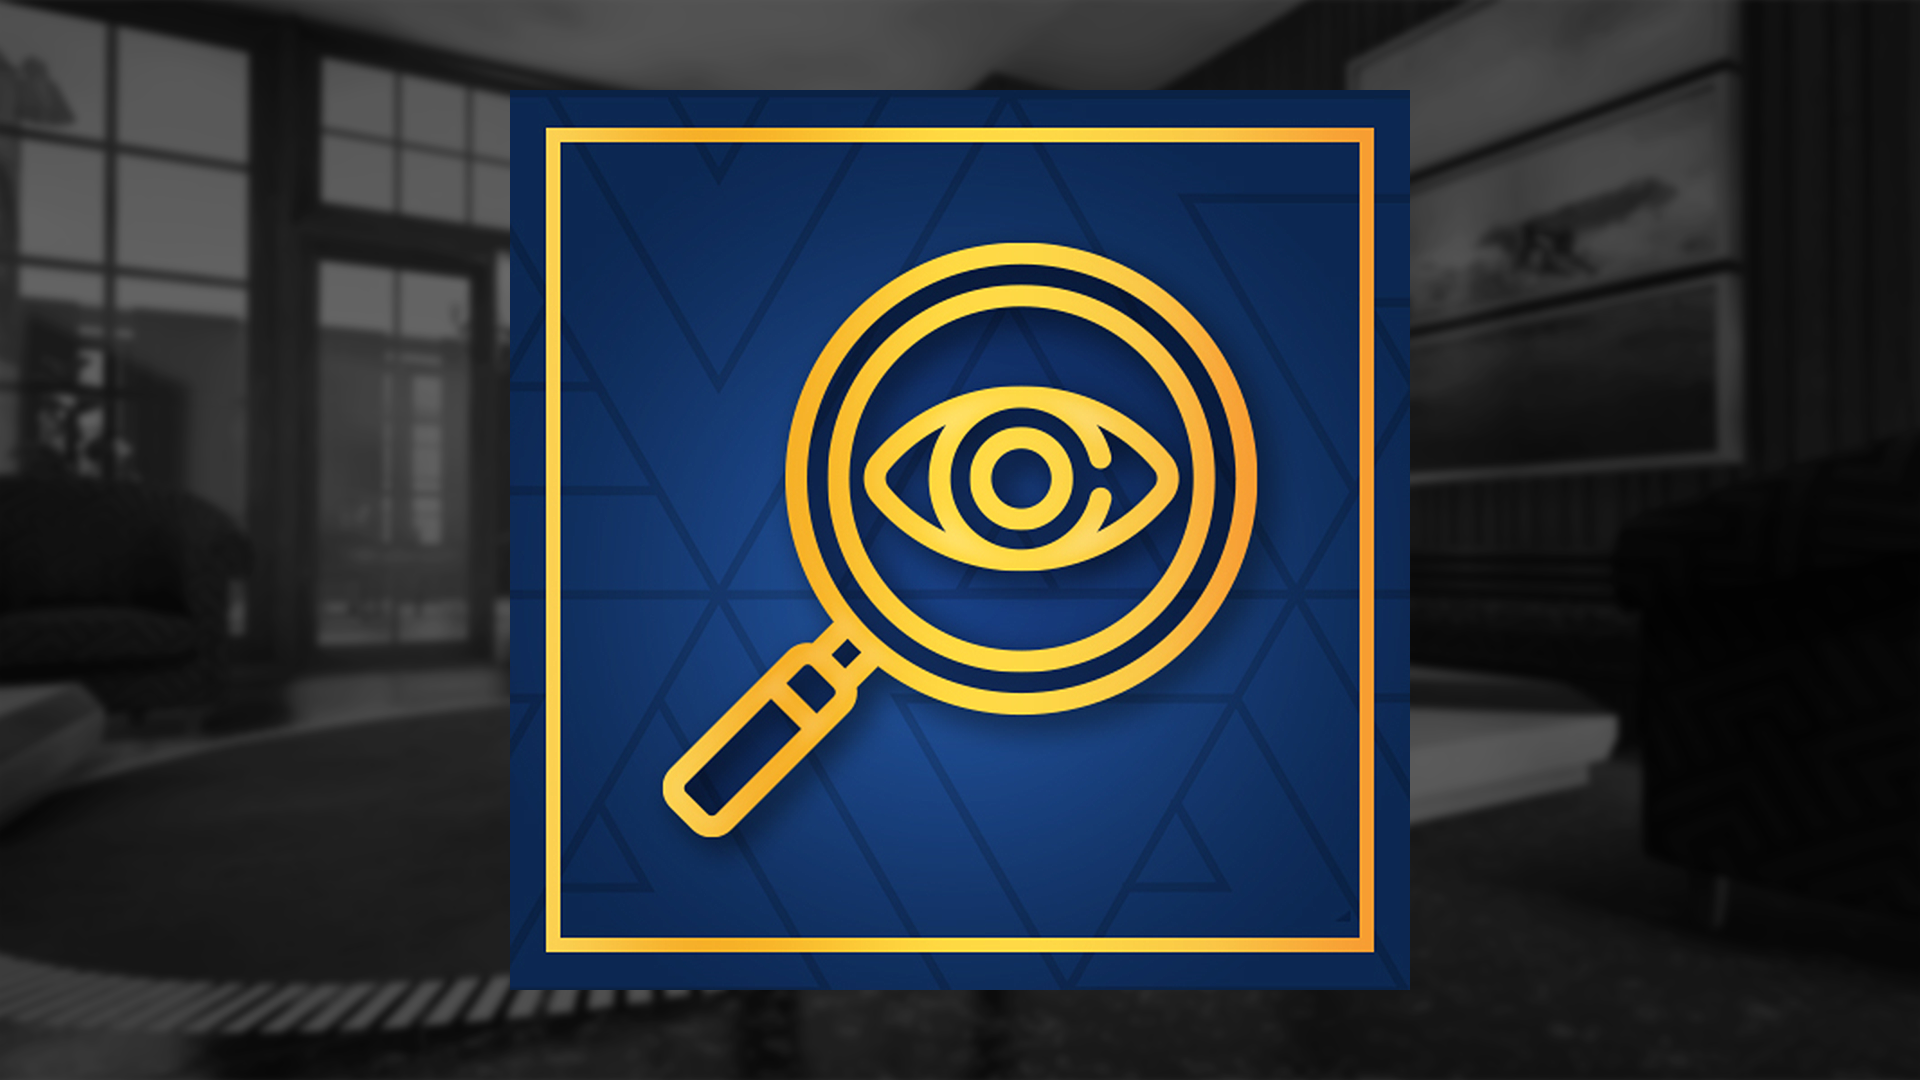 Icon for Hotel sleuthing